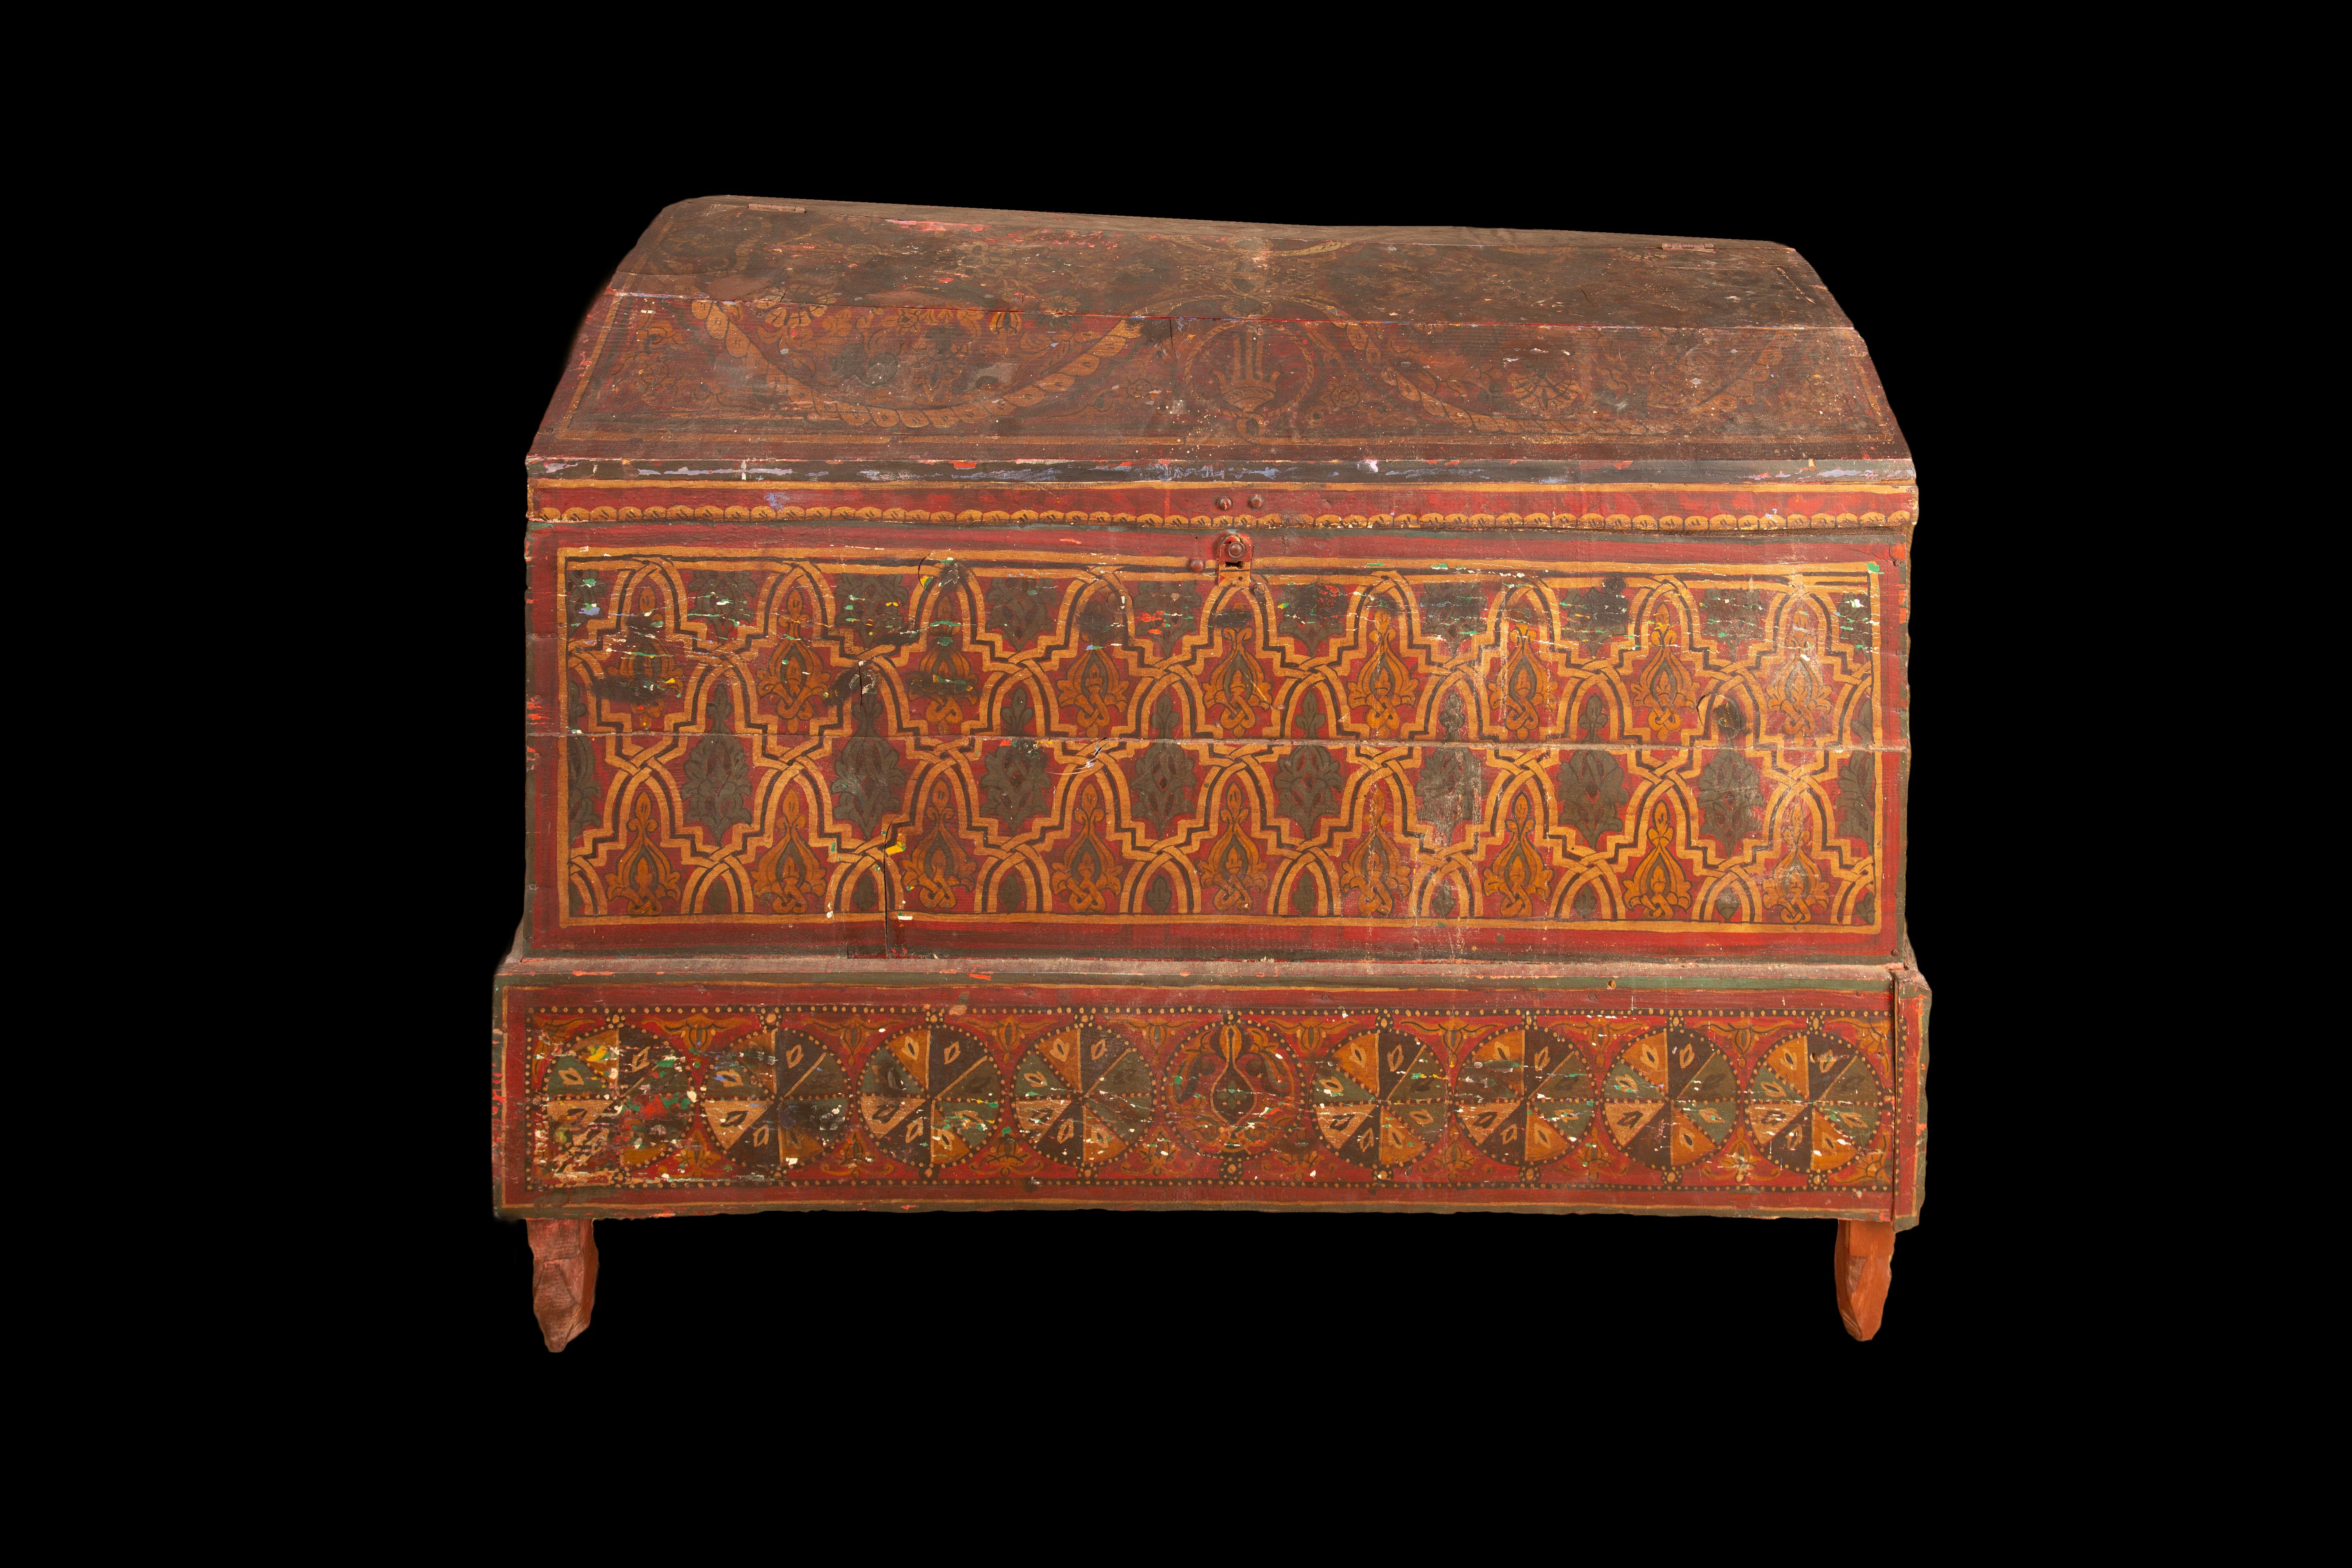 This 19th century Moroccan Berber chest is a masterpiece of craftsmanship. Made from pine wood, it features beautifully painted sides and top, showcasing intricate patterns and vibrant colors. The original interior offers ample storage space for